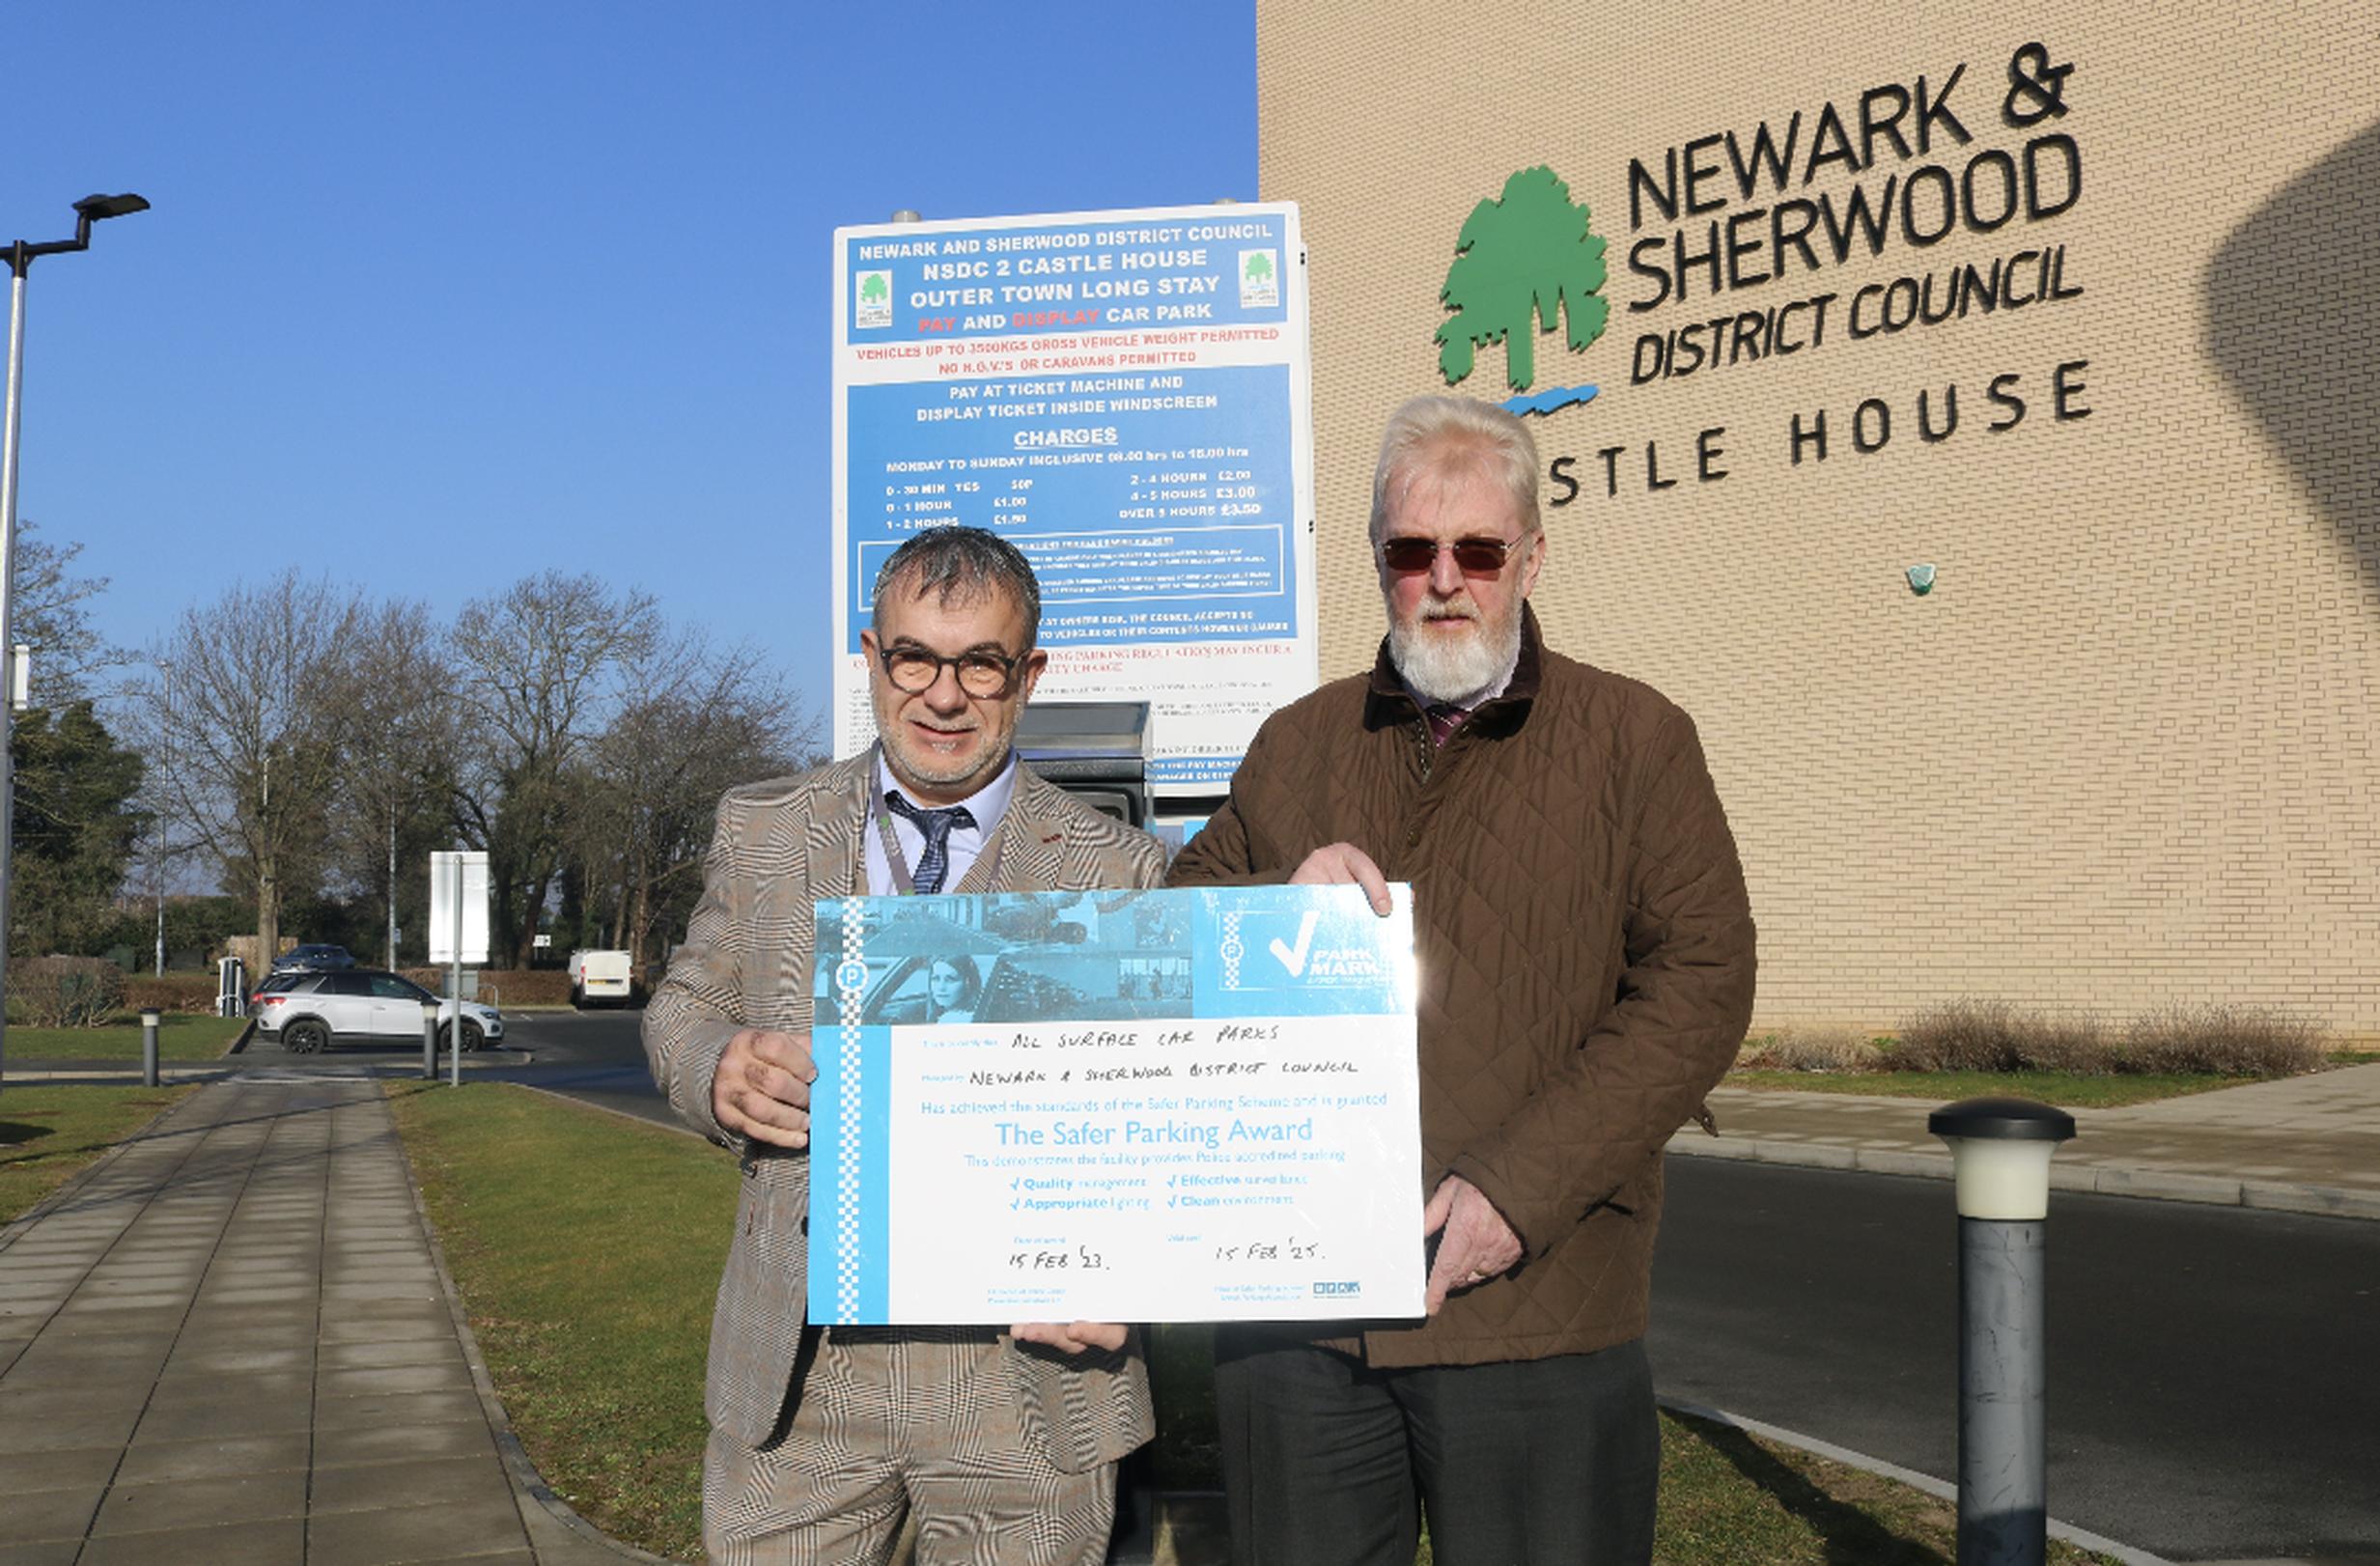 Brian Rawlinson, Newark and Sherwood parking services manager, and Peter Gravells, BPA area manager